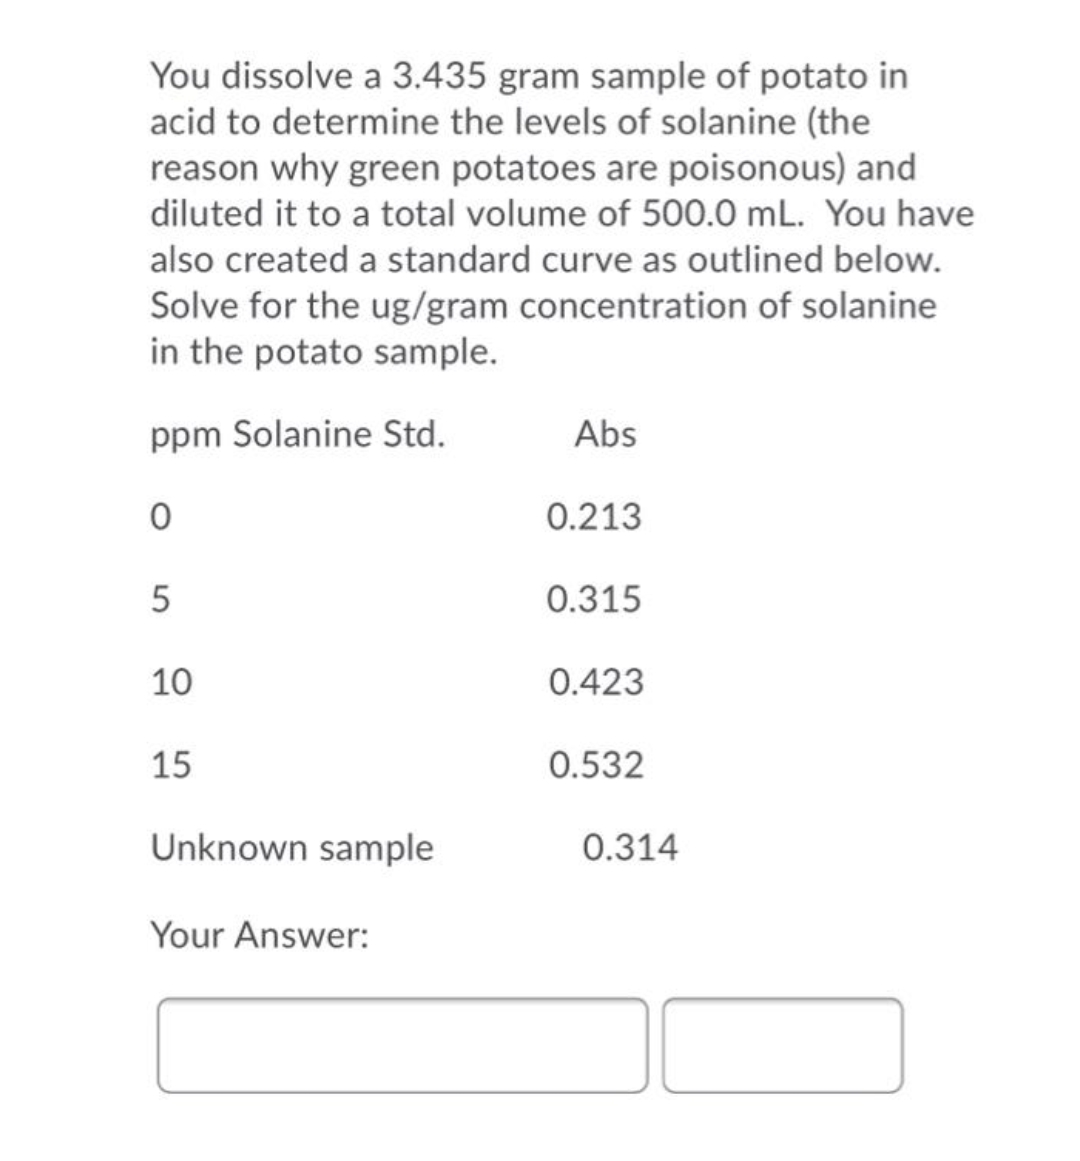 You dissolve a 3.435 gram sample of potato in
acid to determine the levels of solanine (the
reason why green potatoes are poisonous) and
diluted it to a total volume of 500.0 mL. You have
also created a standard curve as outlined below.
Solve for the ug/gram concentration of solanine
in the potato sample.
ppm Solanine Std.
Abs
0.213
5
0.315
10
0.423
15
0.532
Unknown sample
0.314
Your Answer:
